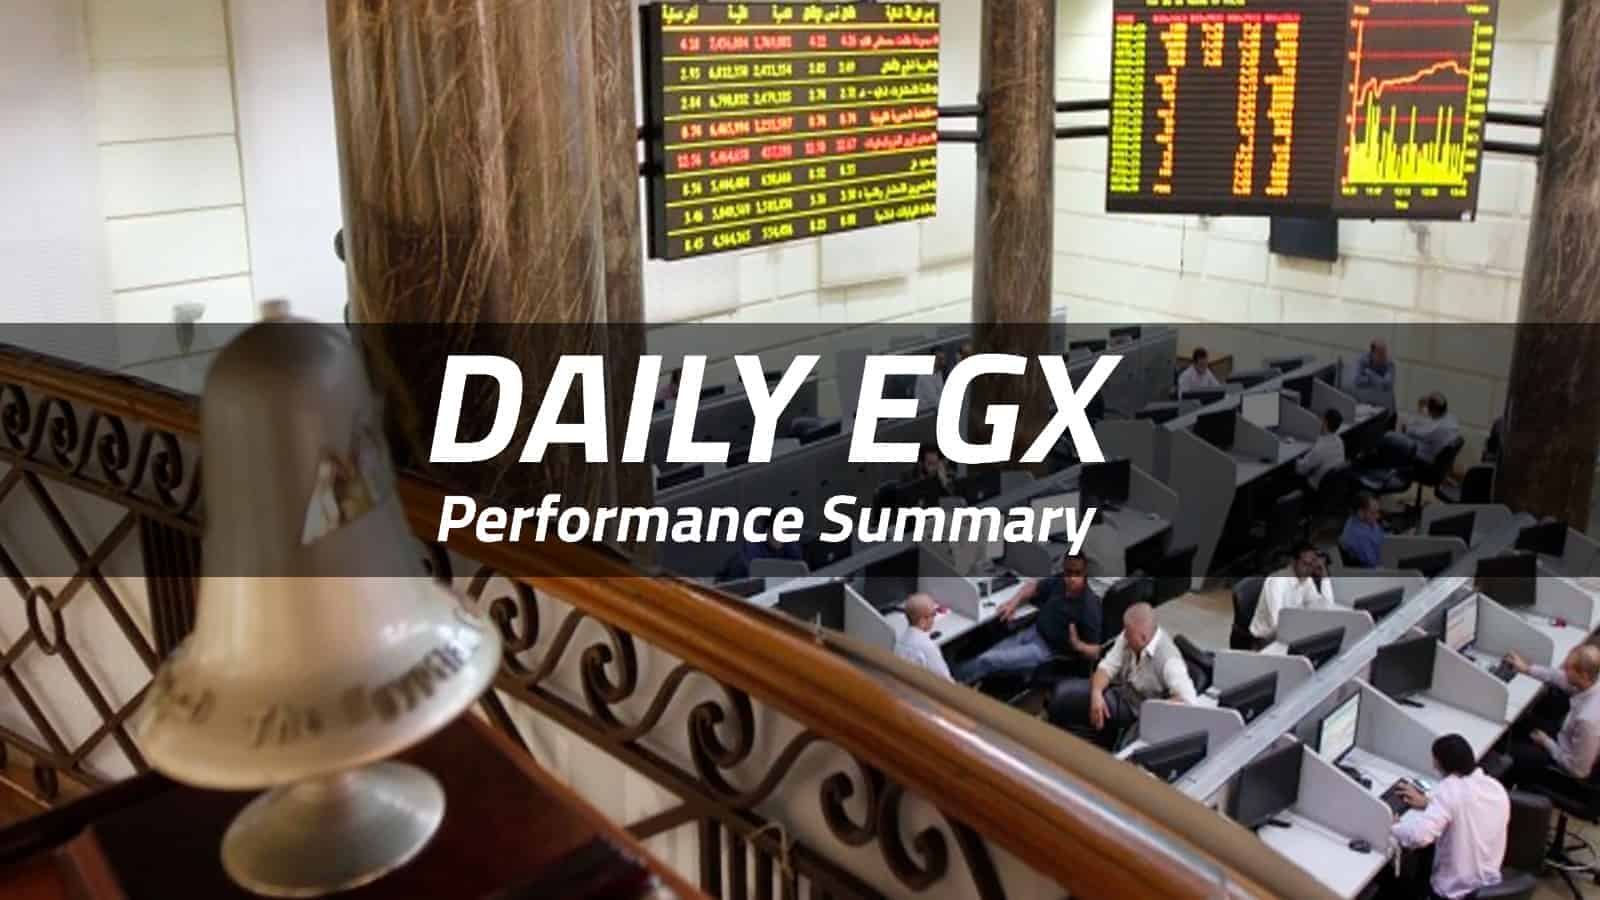 EGX ends Thursday's session with significant losses